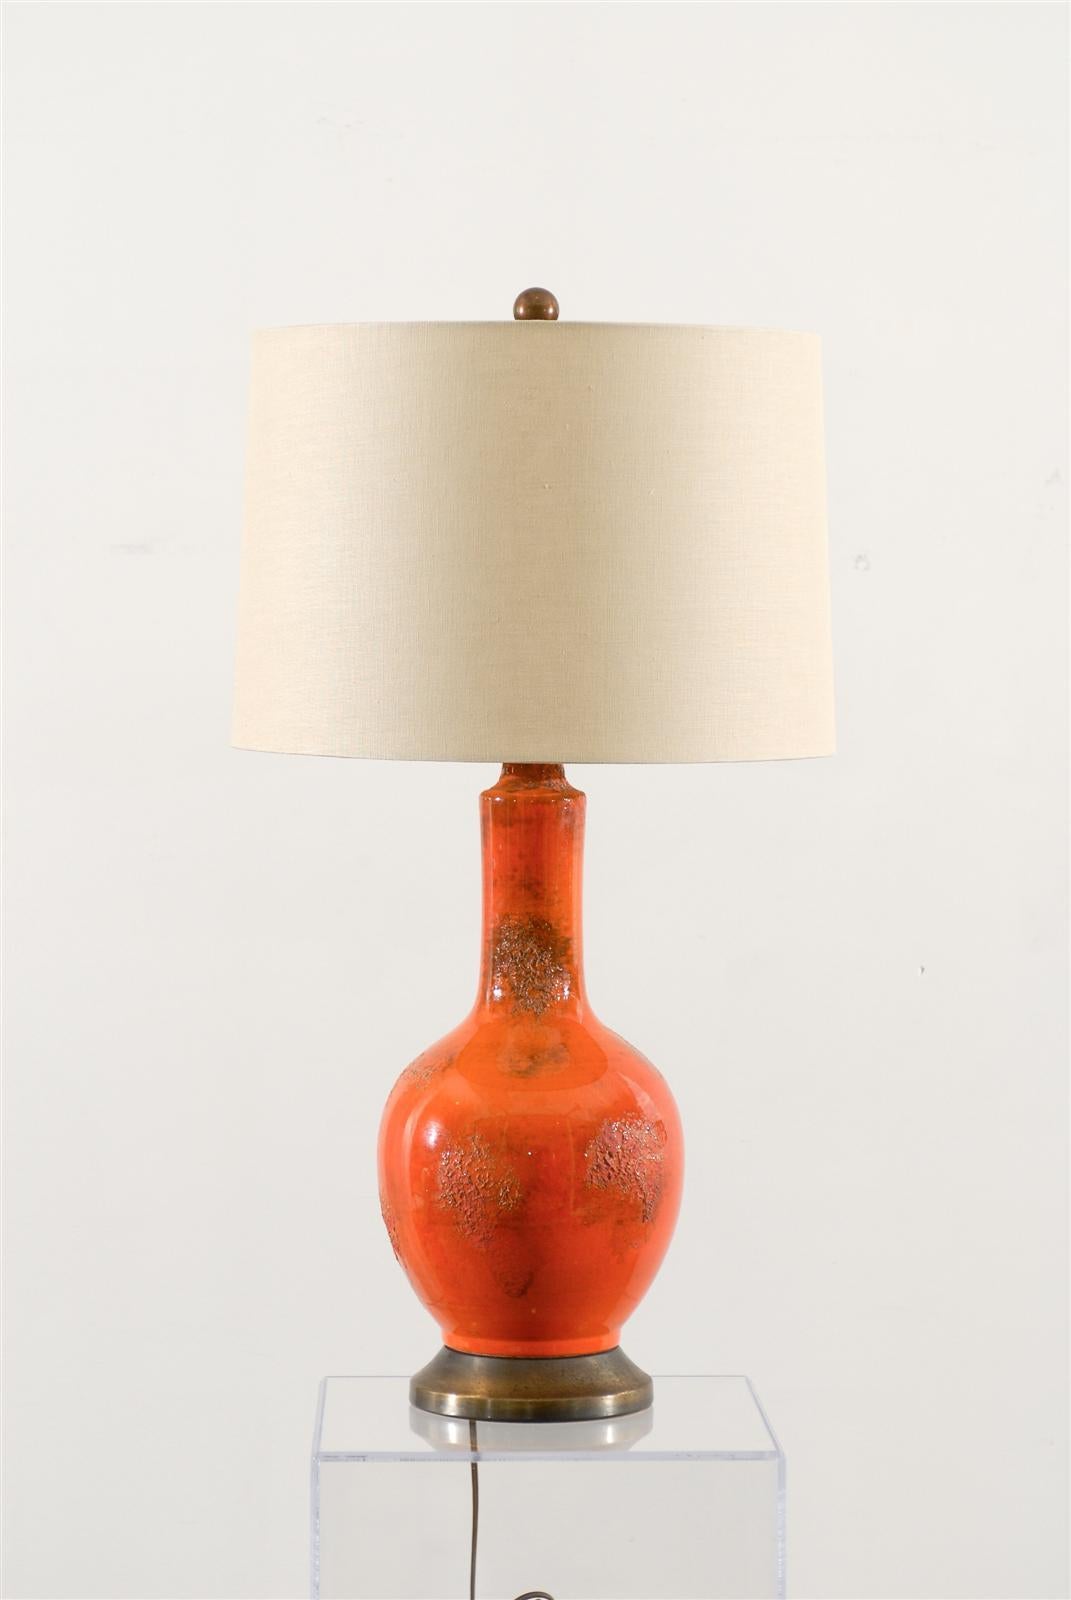 Beautiful pair of Mid-Century Modern lamps in striking orange textured glaze on antique brass bases with new linen drum shades, simple ball finials. Texture and shade color are great together.

28.5